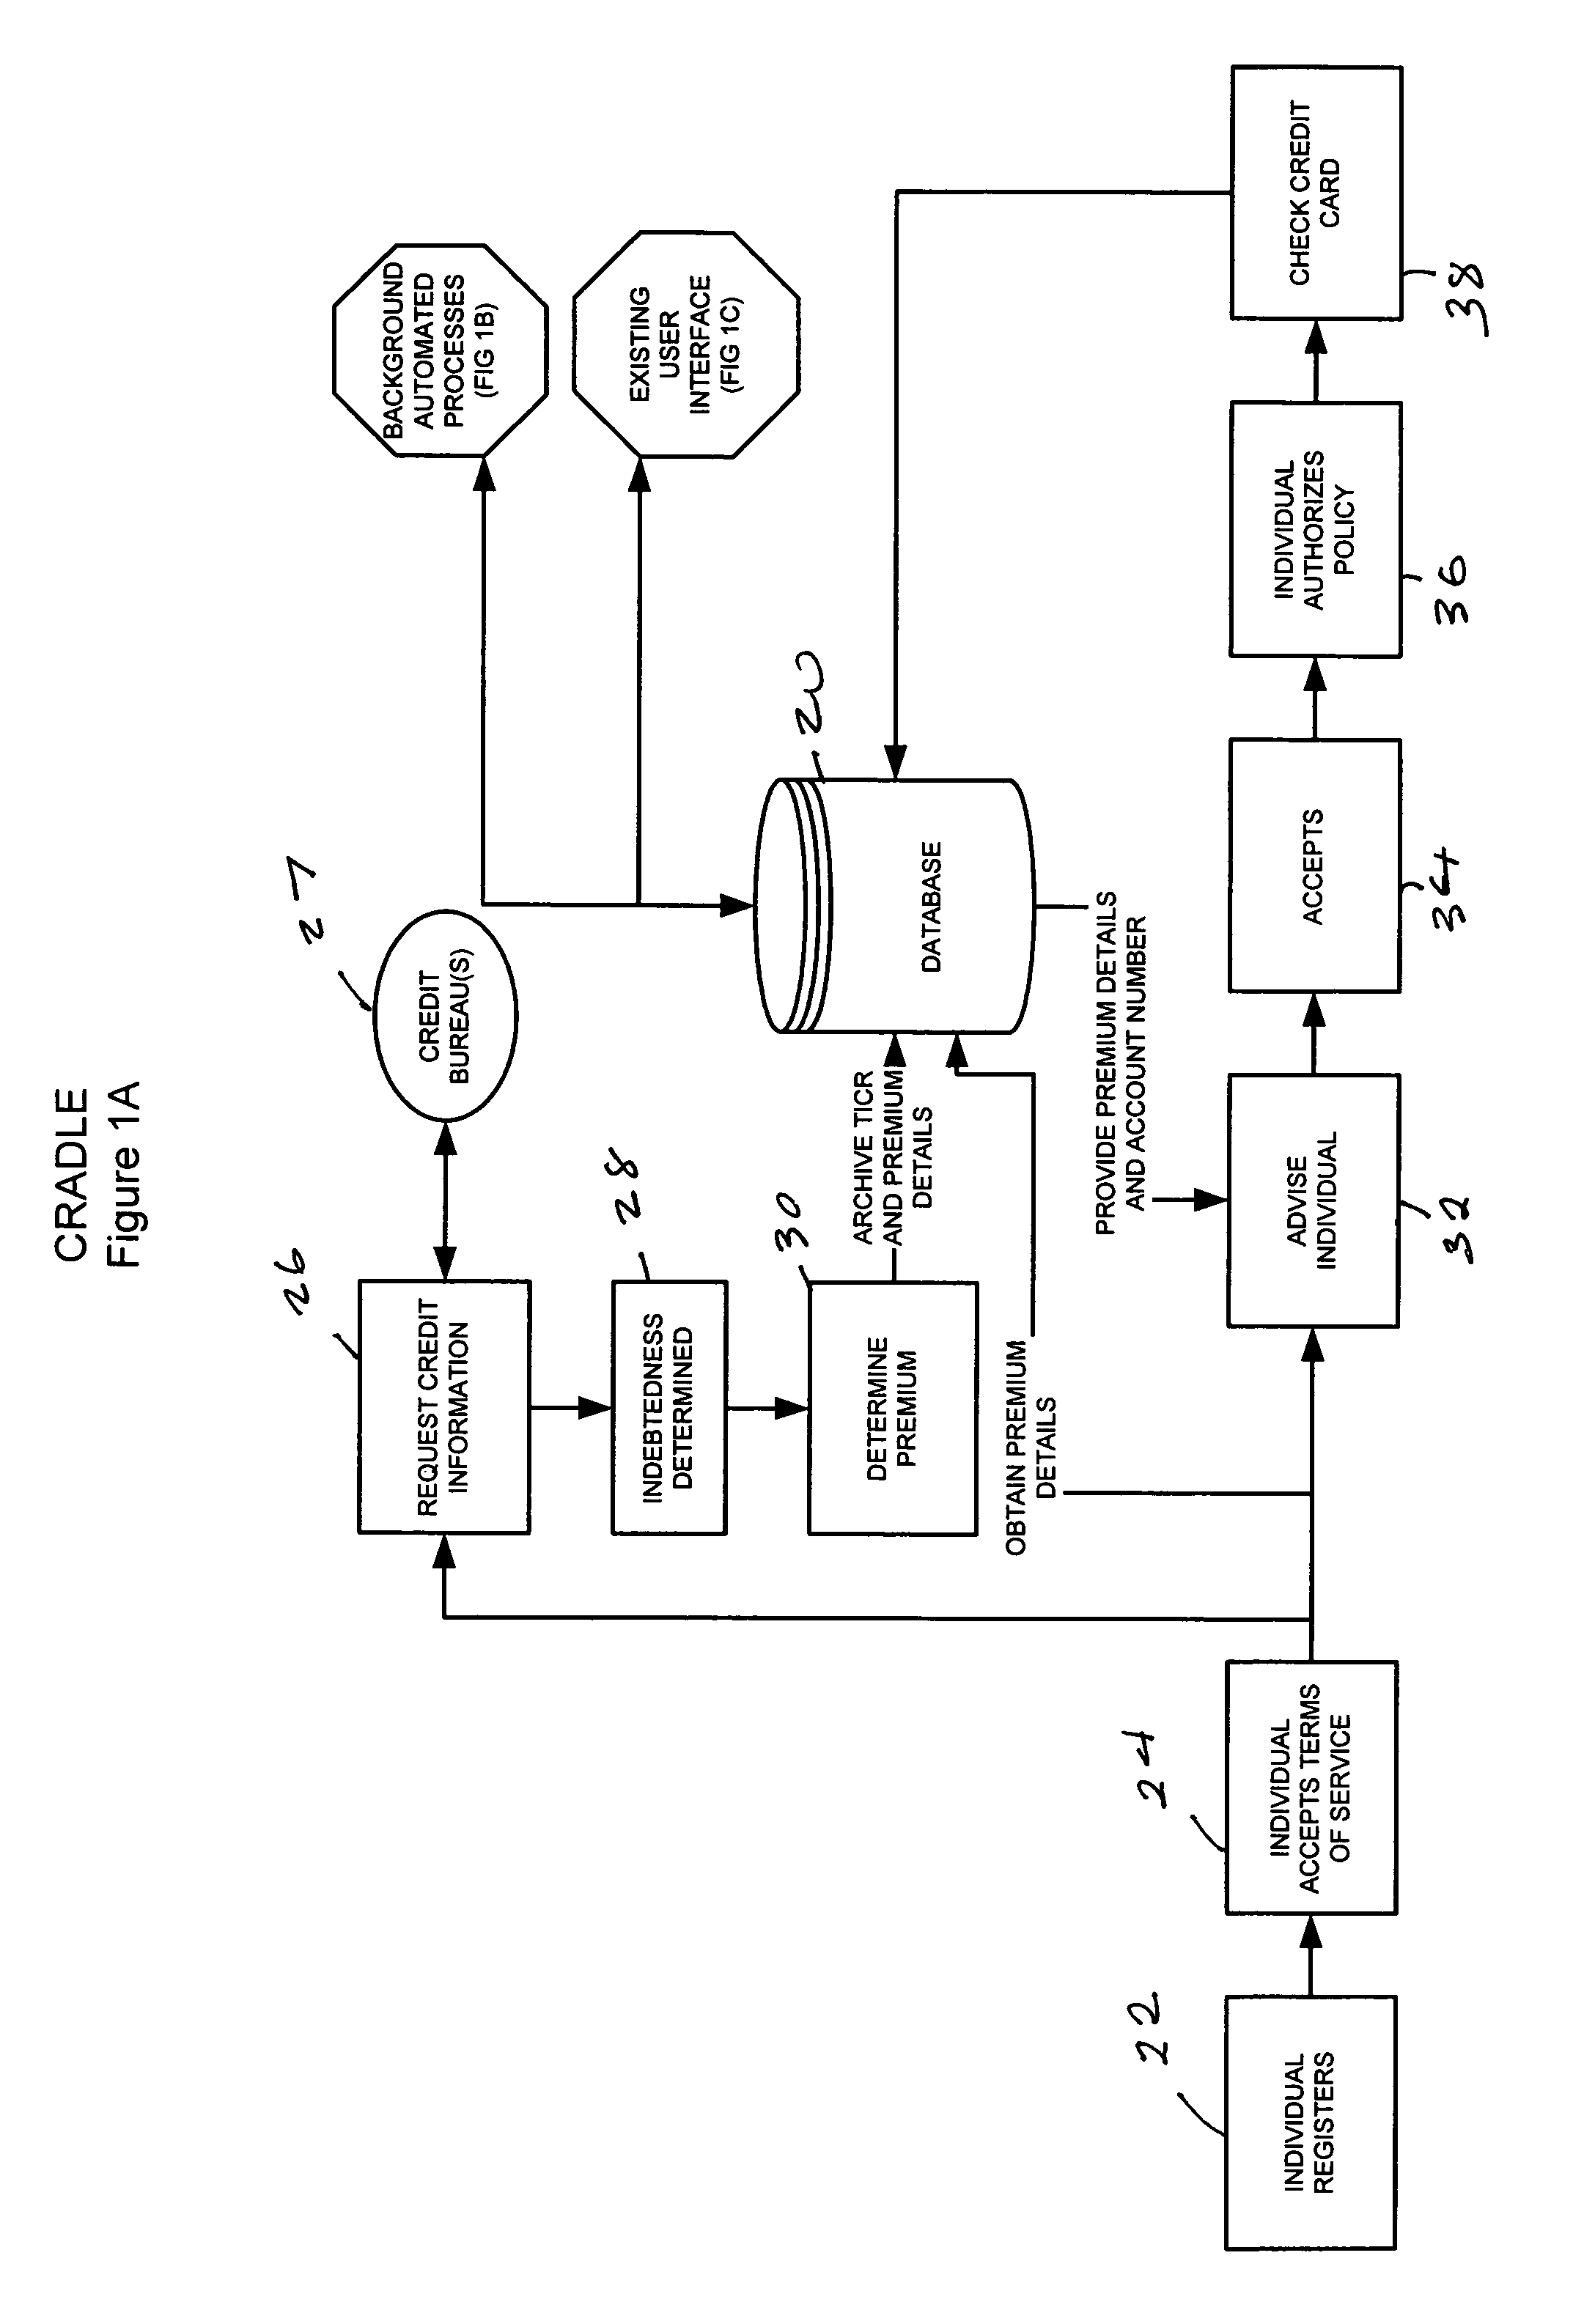 Method for determining insurance benefits and premiums from credit information